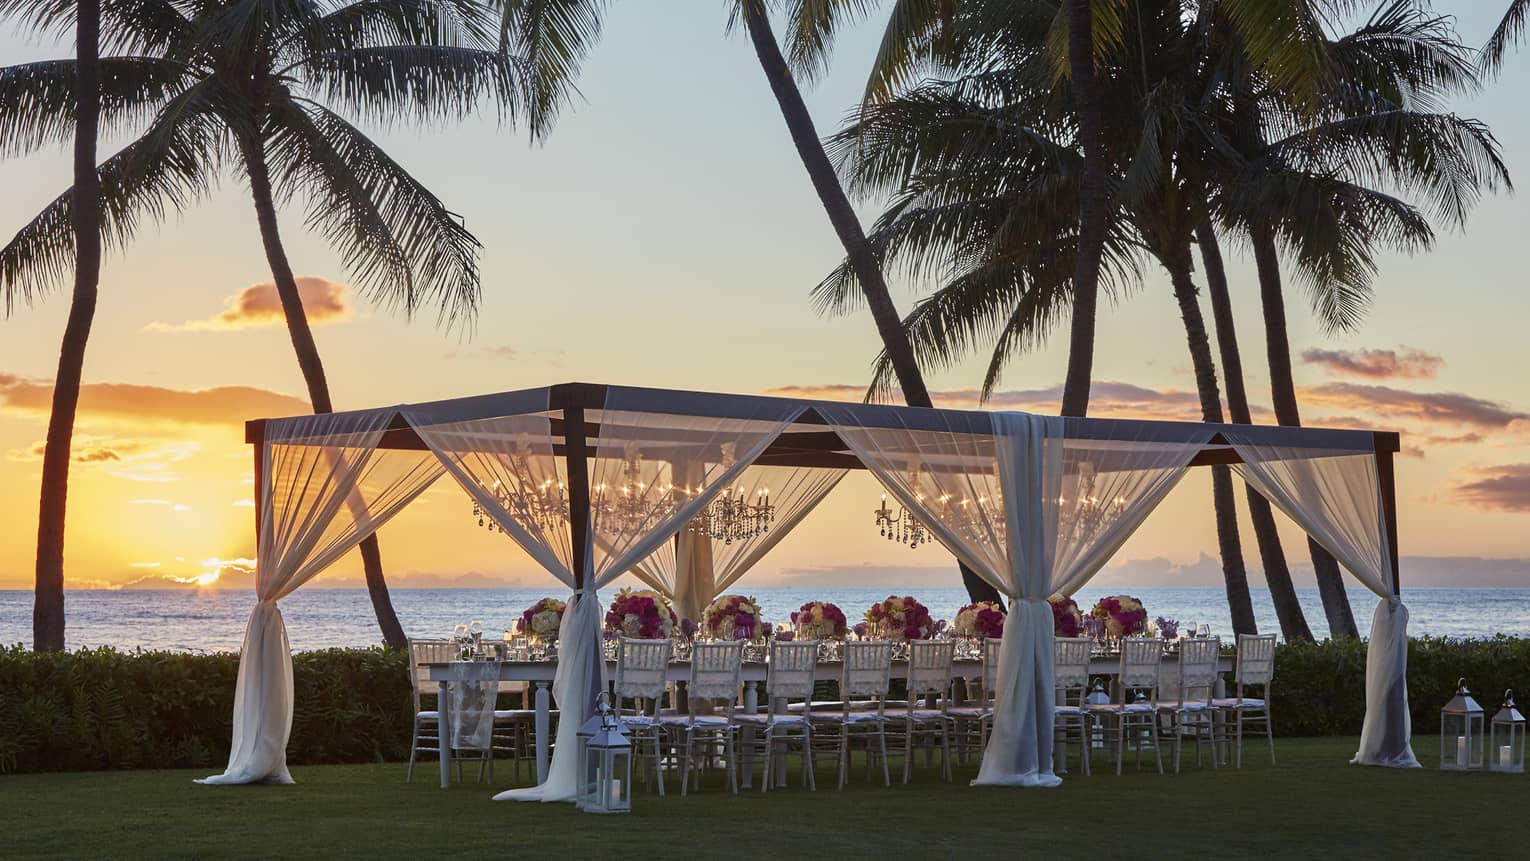 Pergola with sheer white curtains over wedding dining table on lawn by palm trees, ocean at sunset